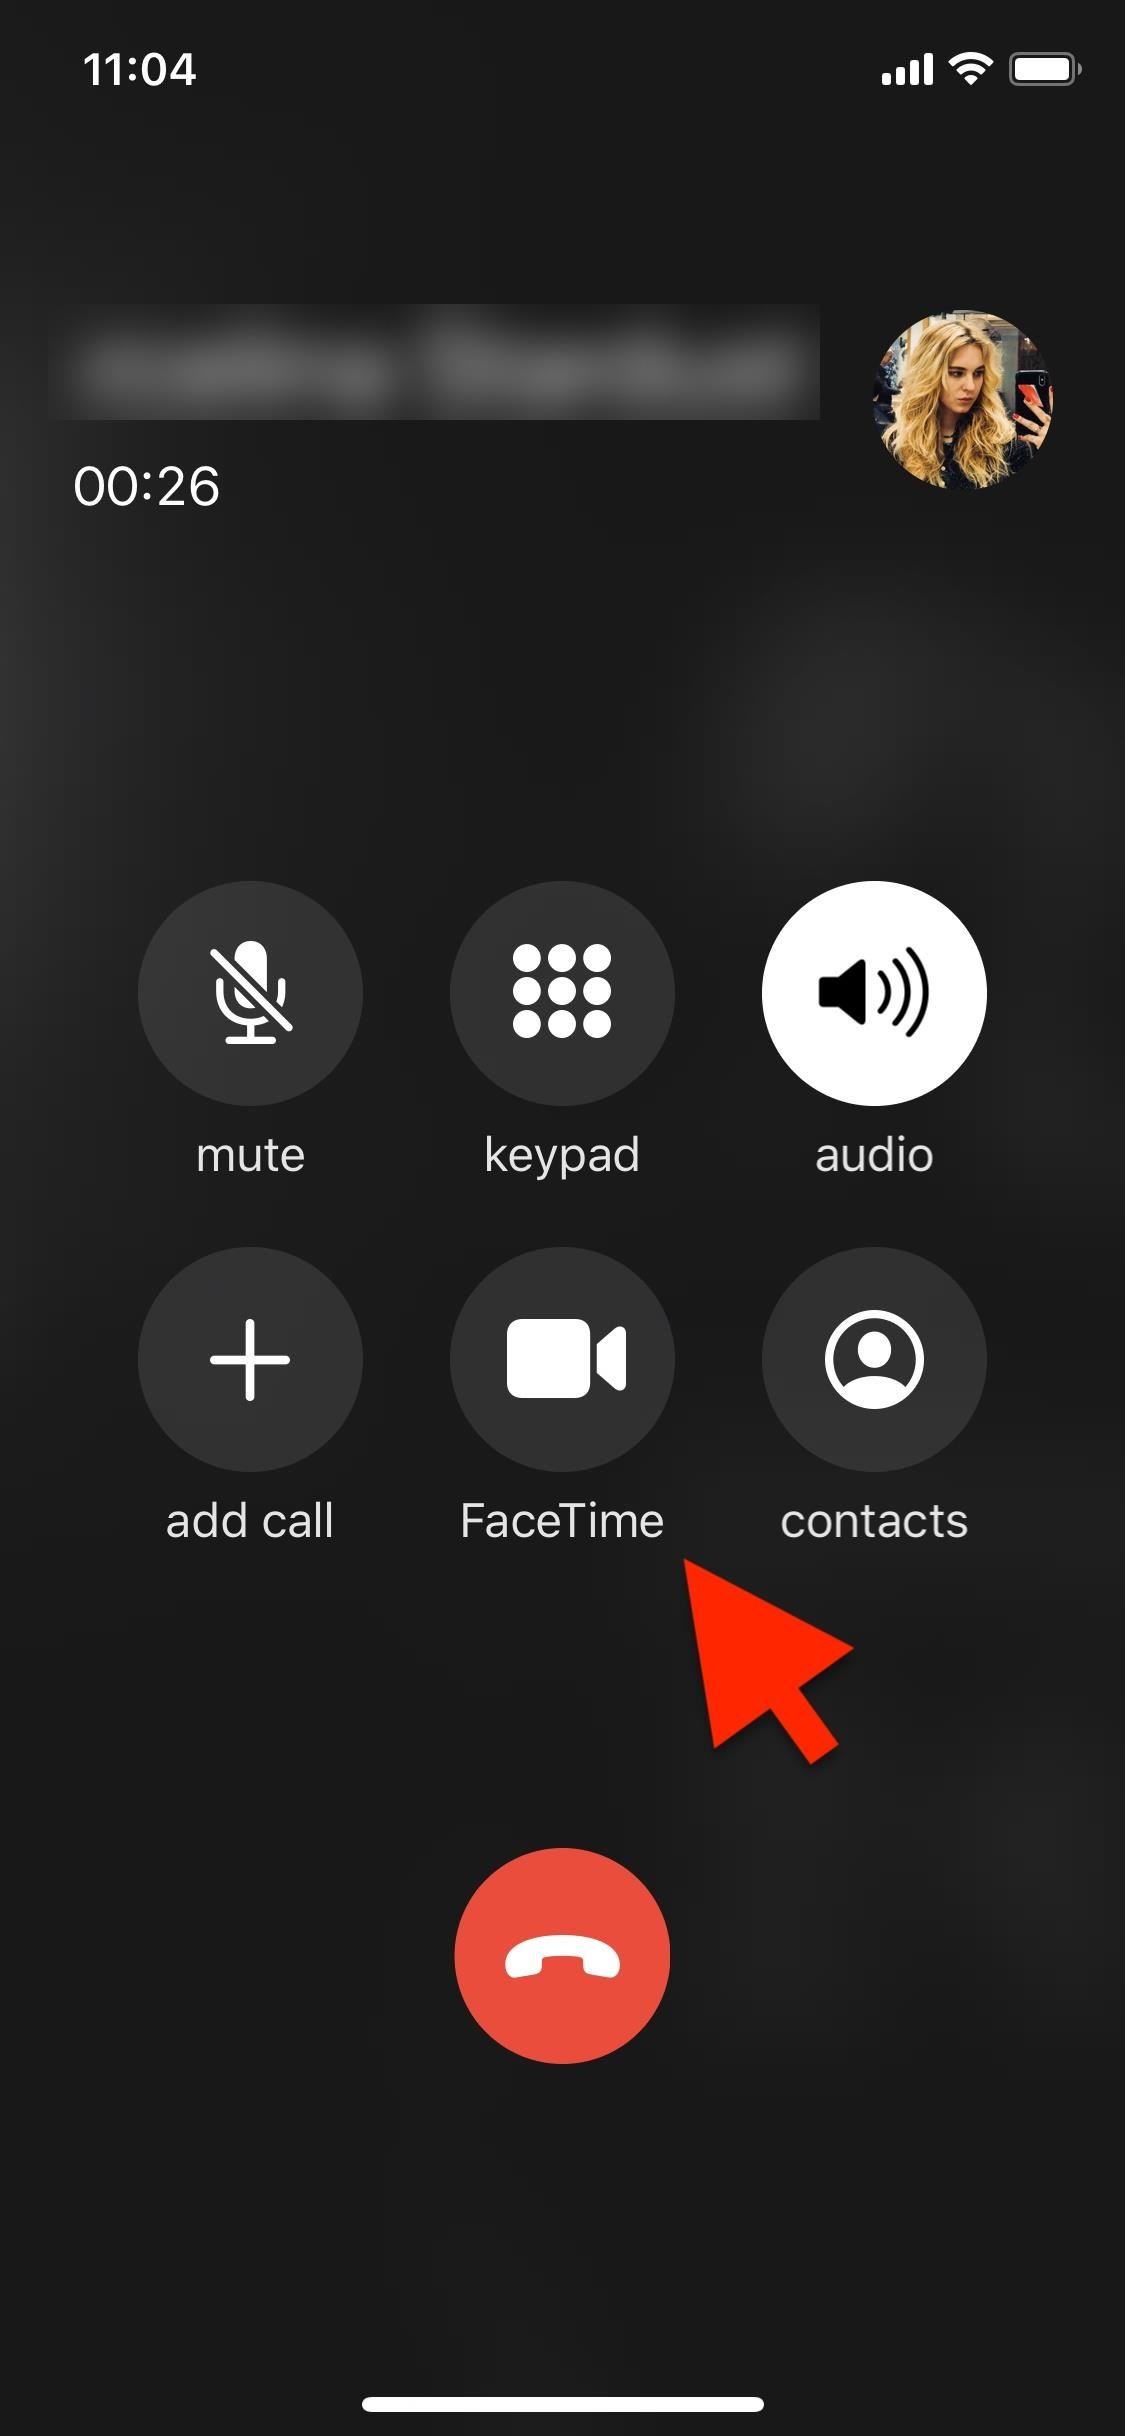 11 Tips for FaceTime Chatting with Friends & Family from Your iPhone